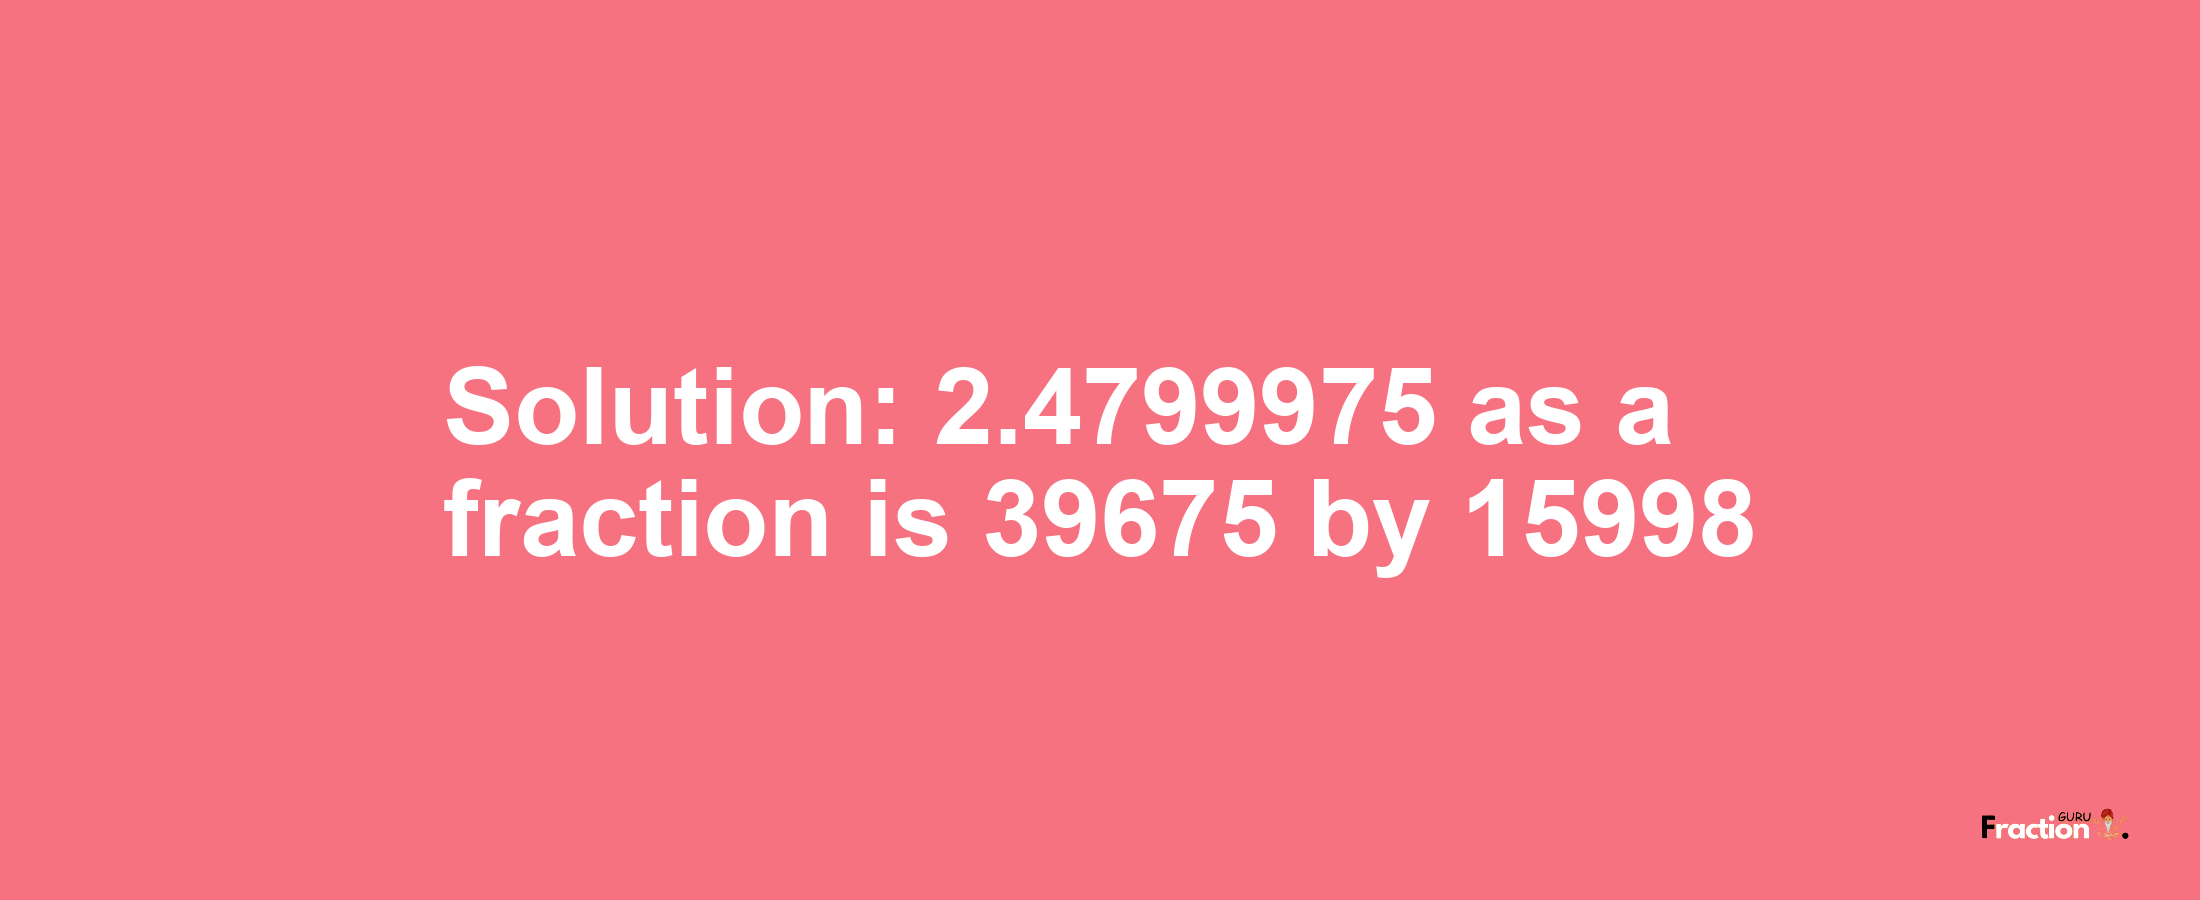 Solution:2.4799975 as a fraction is 39675/15998